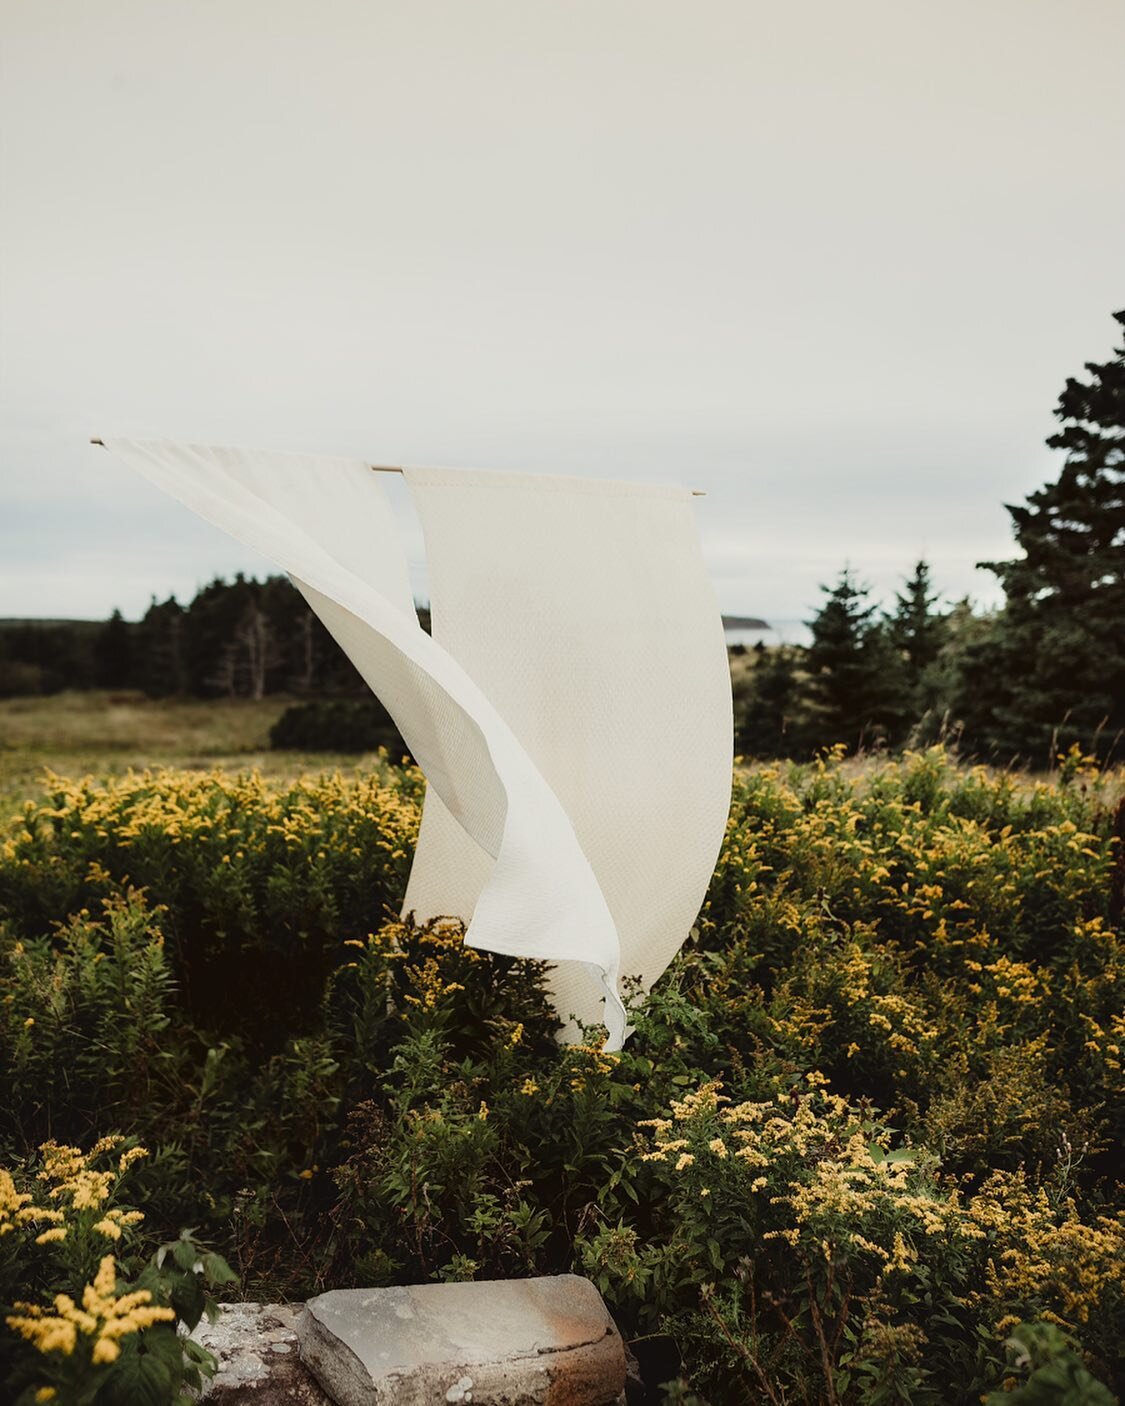 Back in the Winter at @textilmidstod in Bl&ouml;ndu&oacute;s, &Iacute;sland, I worked on some weaving through time that tied me to my great-great grandmother. This Summer, my sweet friend @kristin.m.pope and I made photos of our textiles in both the 